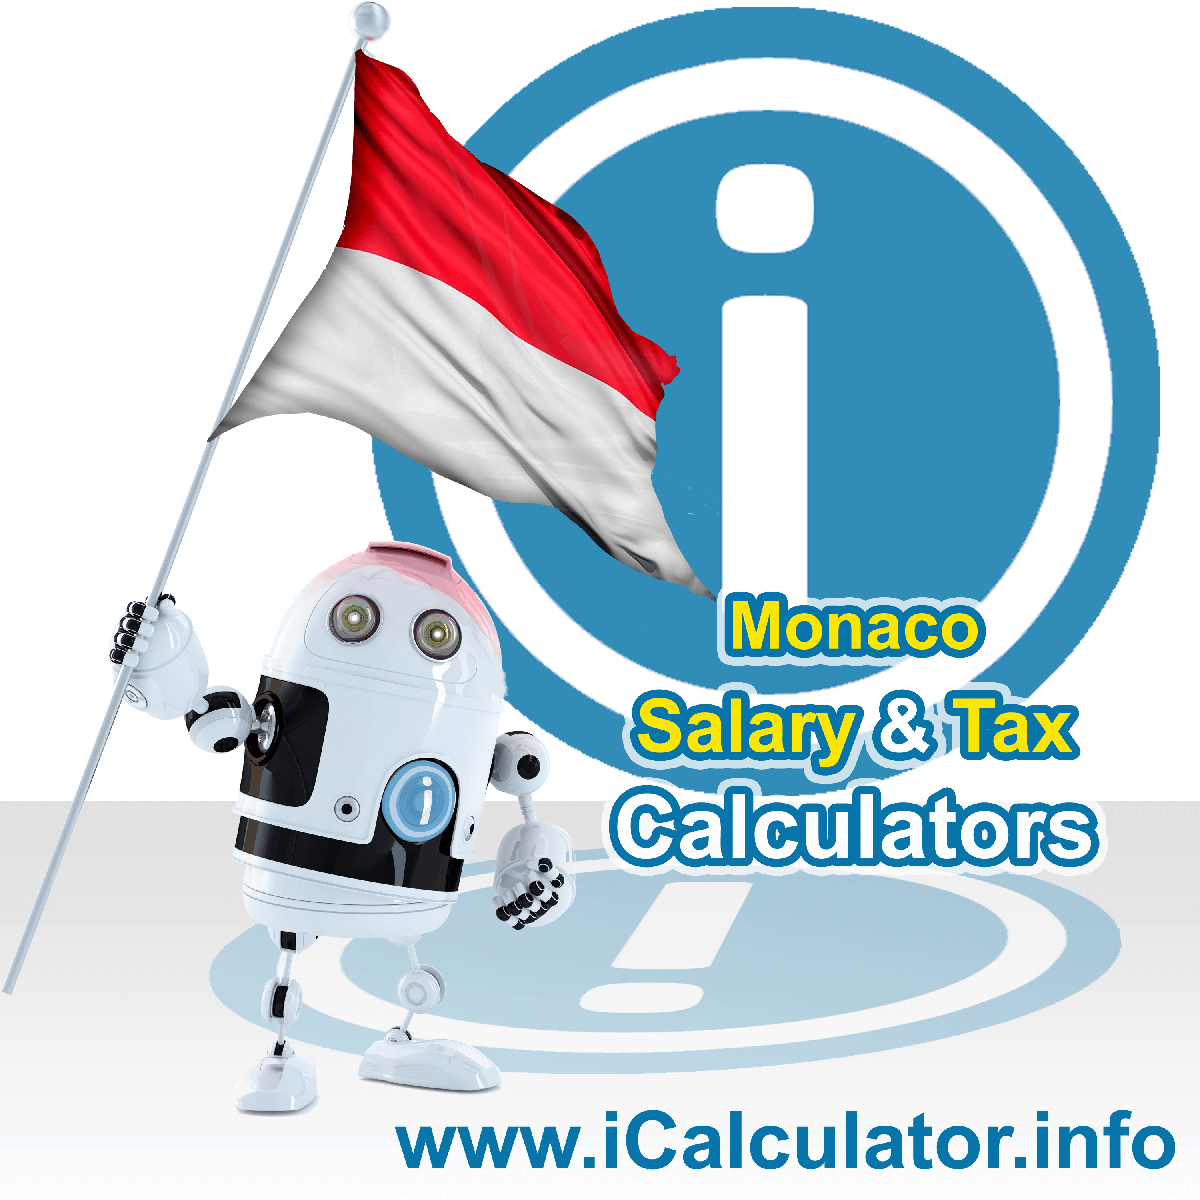 Monaco Tax Calculator. This image shows the Monaco flag and information relating to the tax formula for the Monaco Salary Calculator